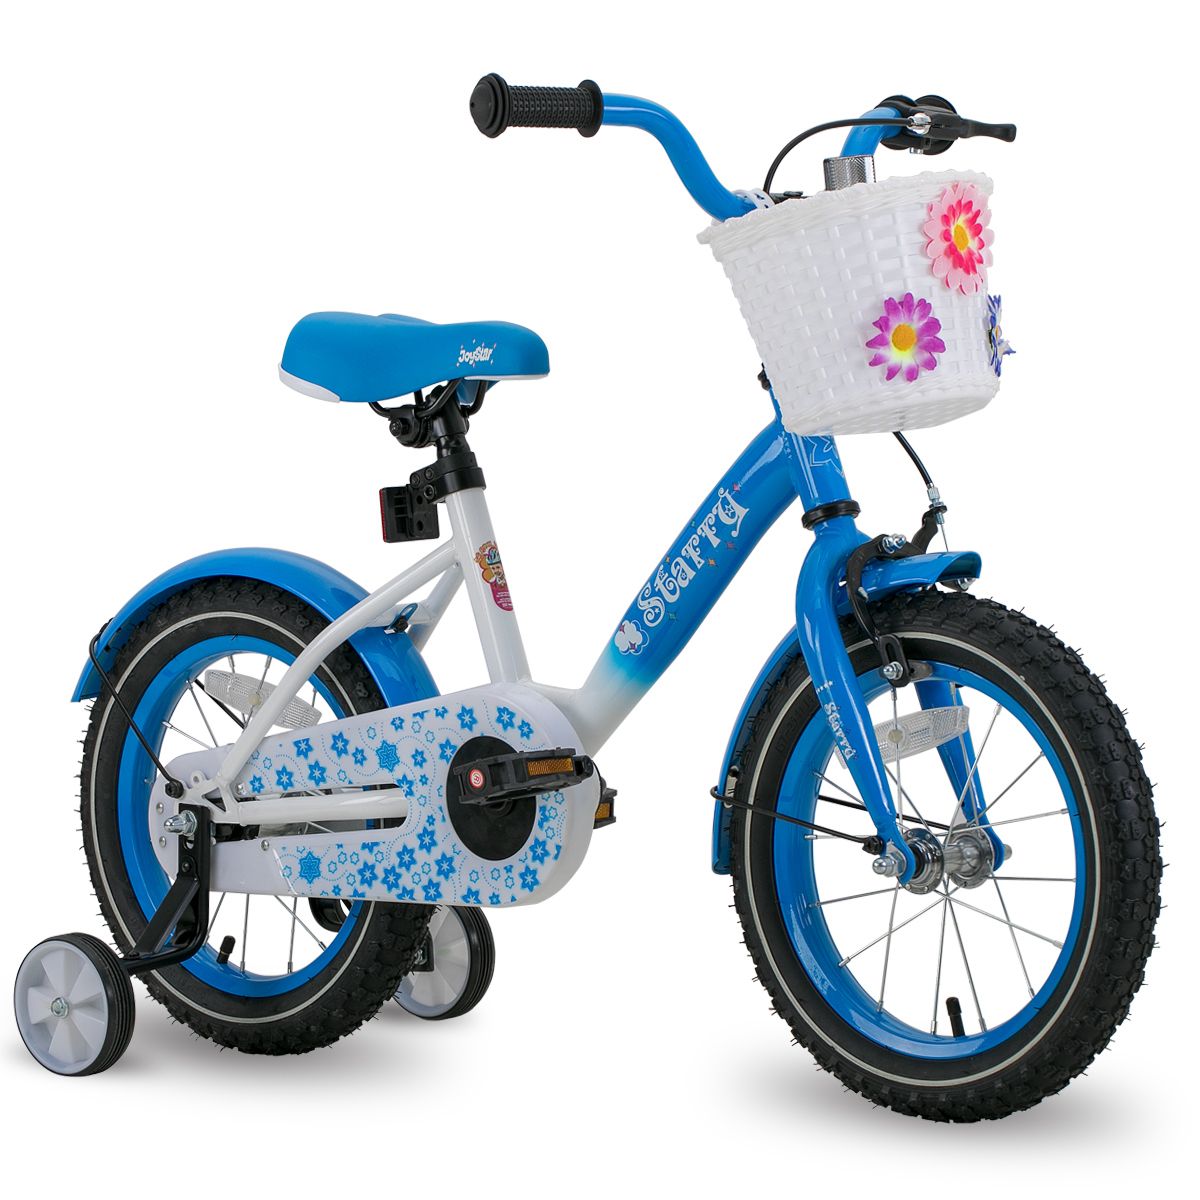 

JOYSTAR Starry 14 16 18 Inch Kids Bike for Ages 3-8 Years Old Girls with Training Wheels and Basket, Girl Bicycle Kids' Bicycles